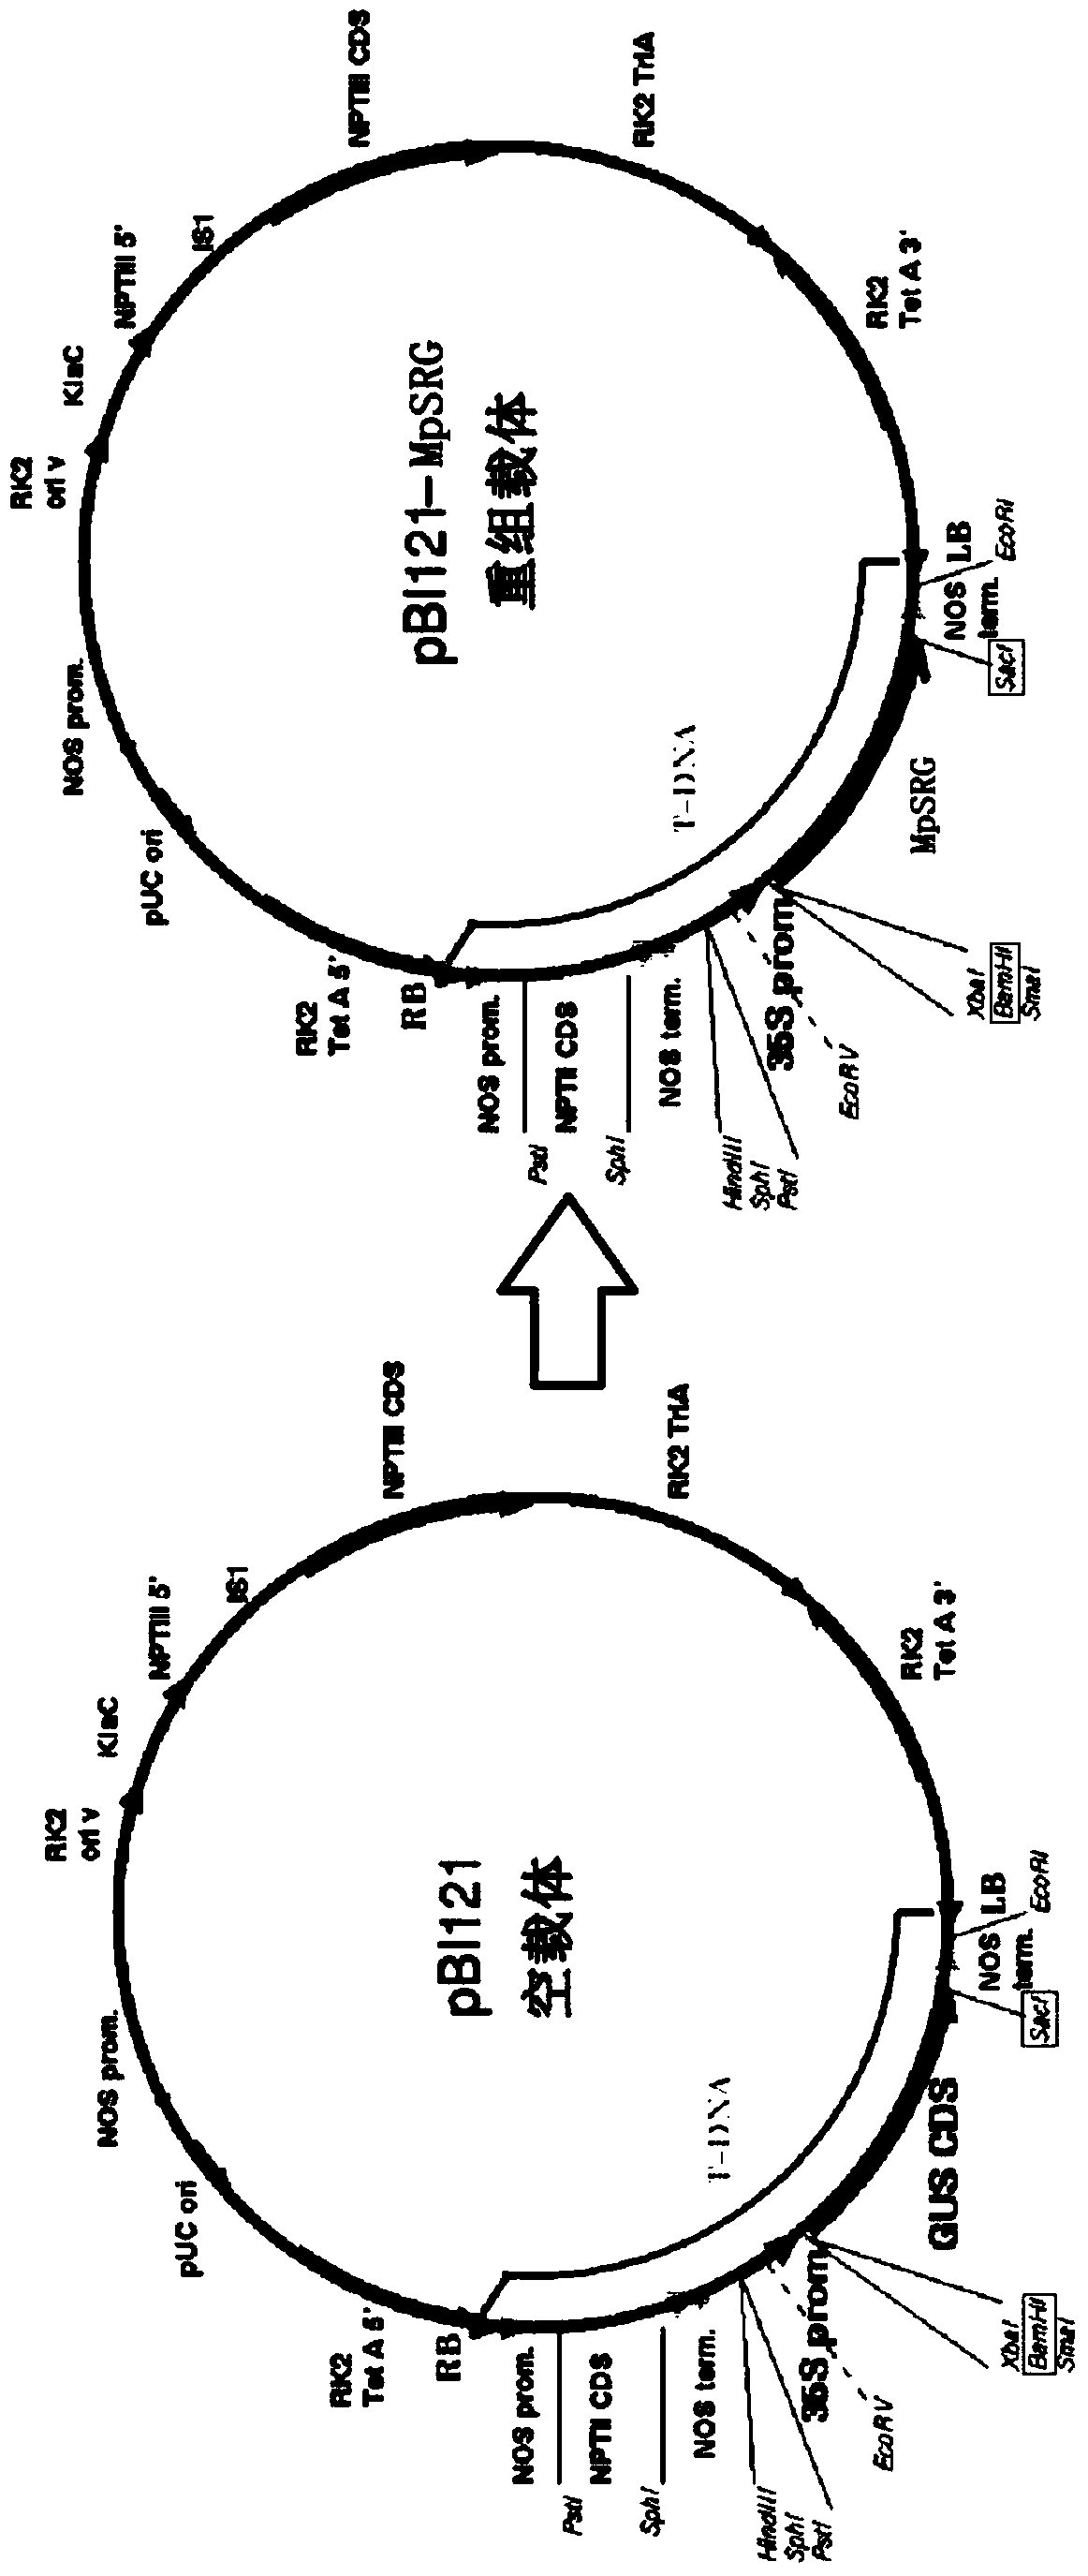 Pongamia pinnata stress tolerance relative gene MpSRG as well as coded protein and application thereof